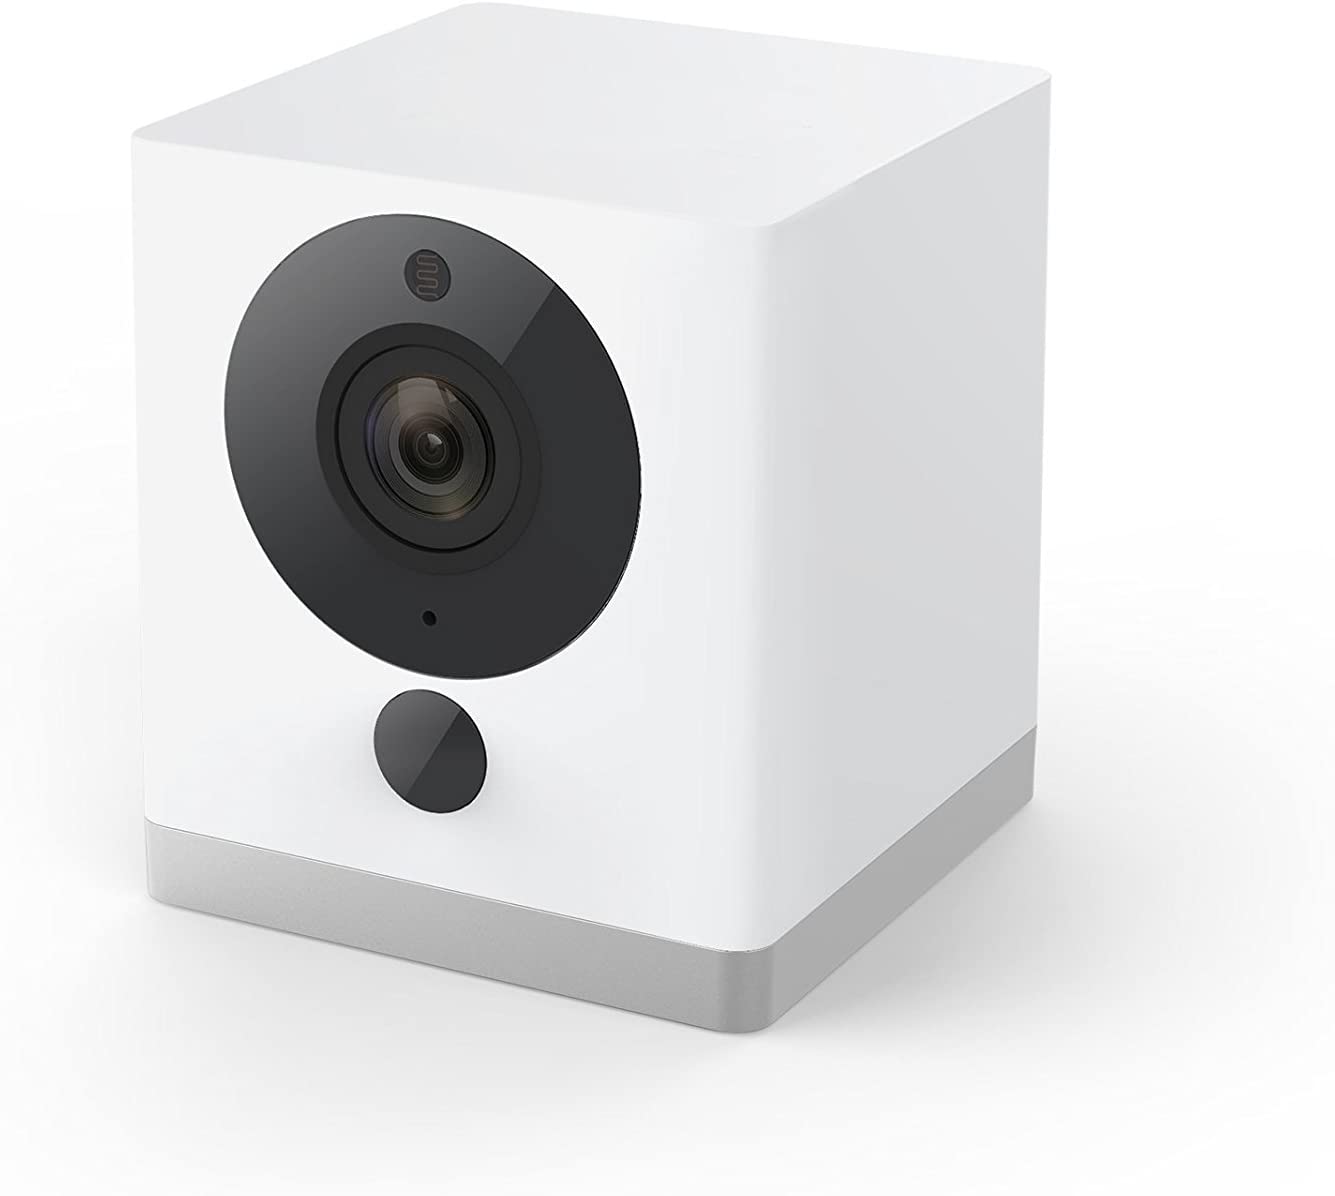 Can the WYZE camera be hacked? Completed Guide.